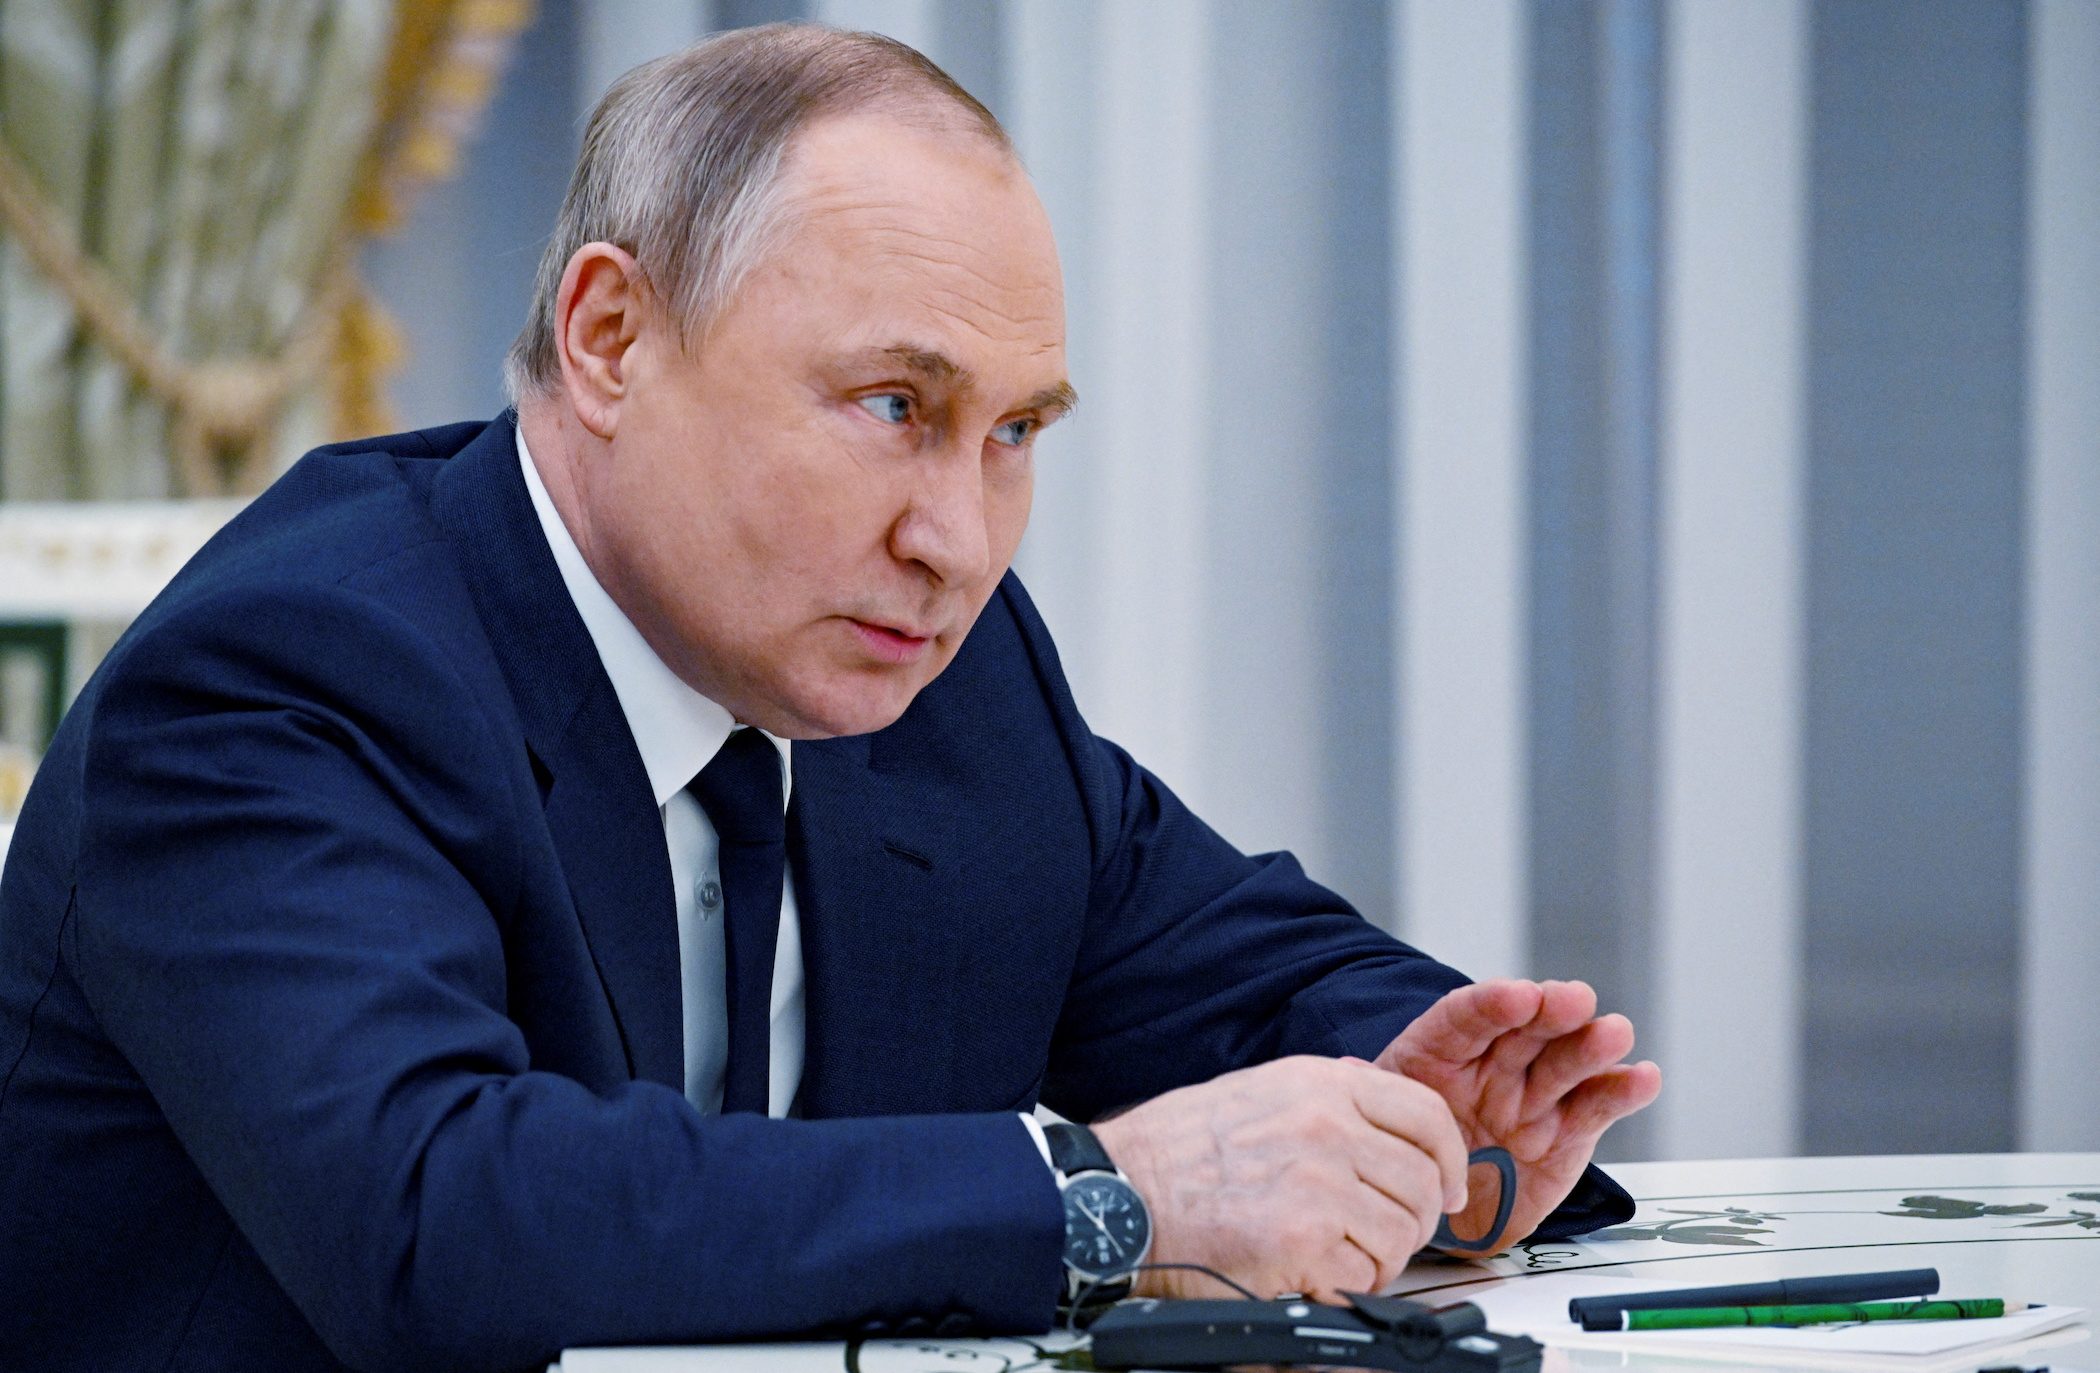 Putin puts West on notice: Moscow can terminate exports and deals